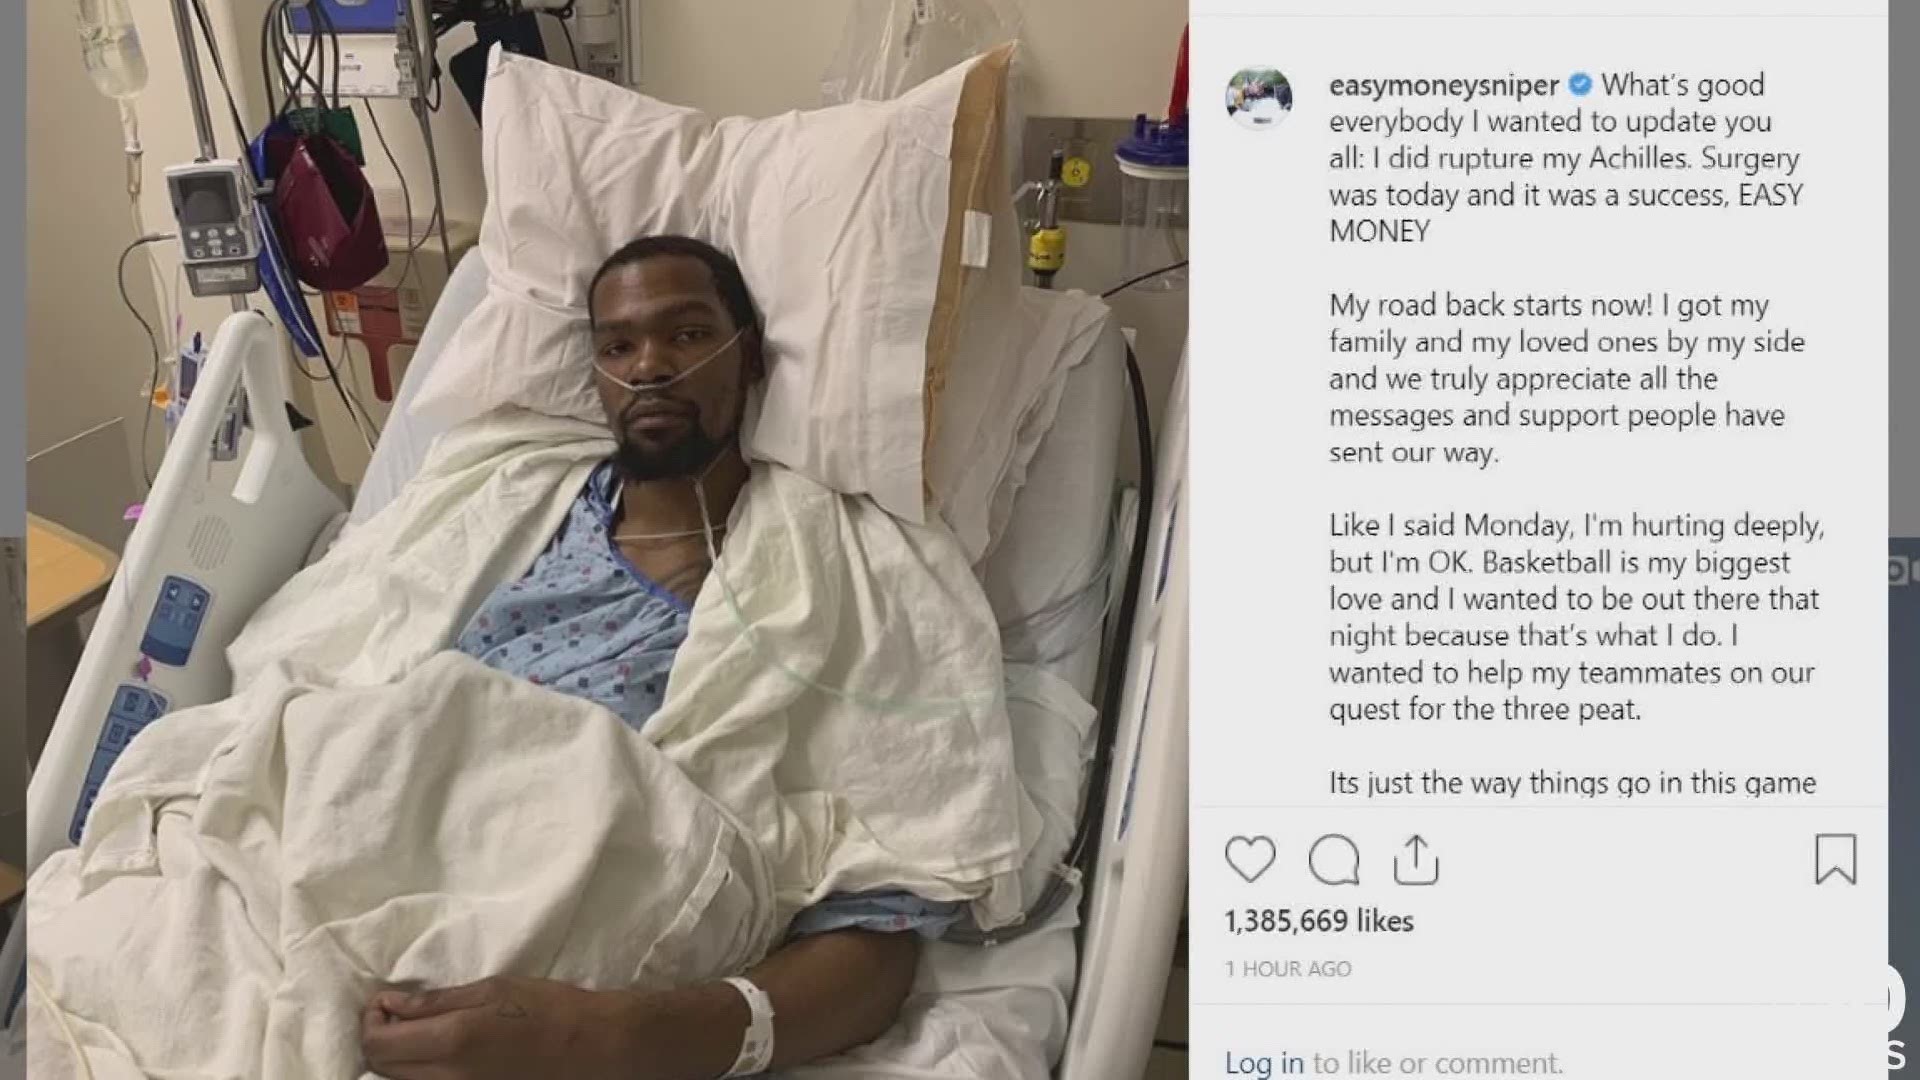 Players for the Golden State Warriors and Toronto Raptors react to Kevin Durant's season-ending injury ahead of Game 6 of the NBA Finals in Oakland